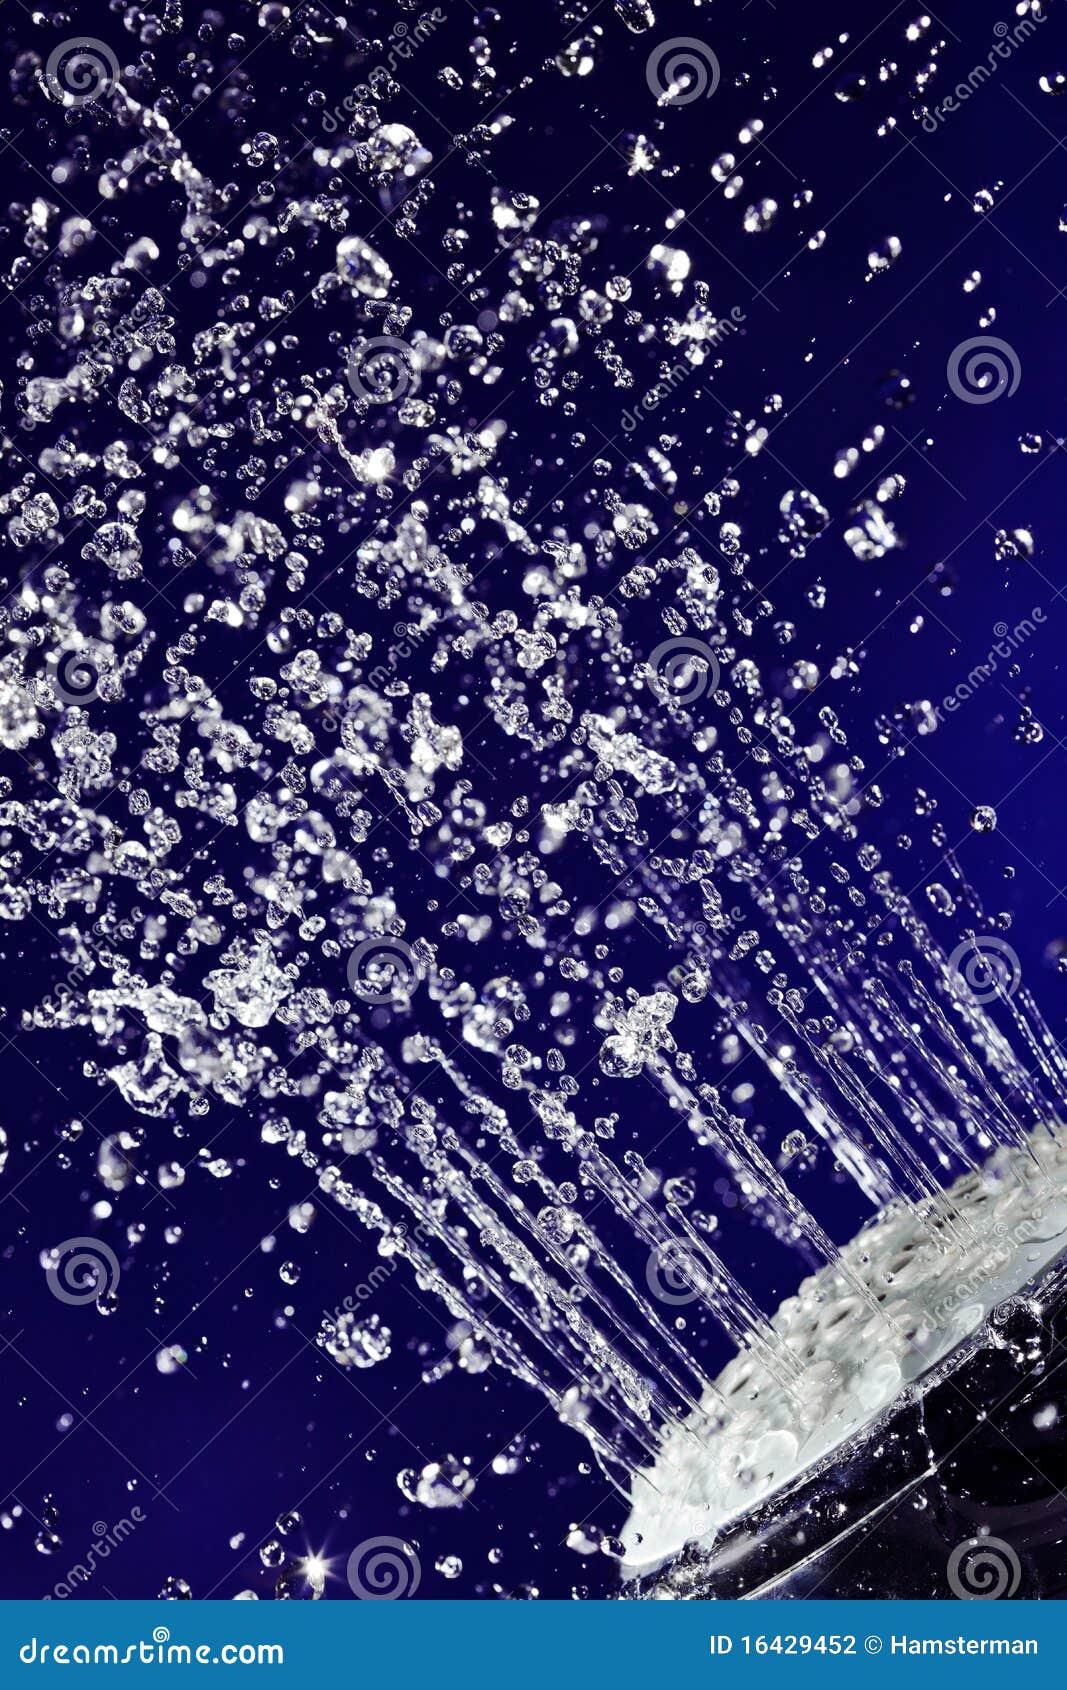 hand shower douche with stopped motion water drops